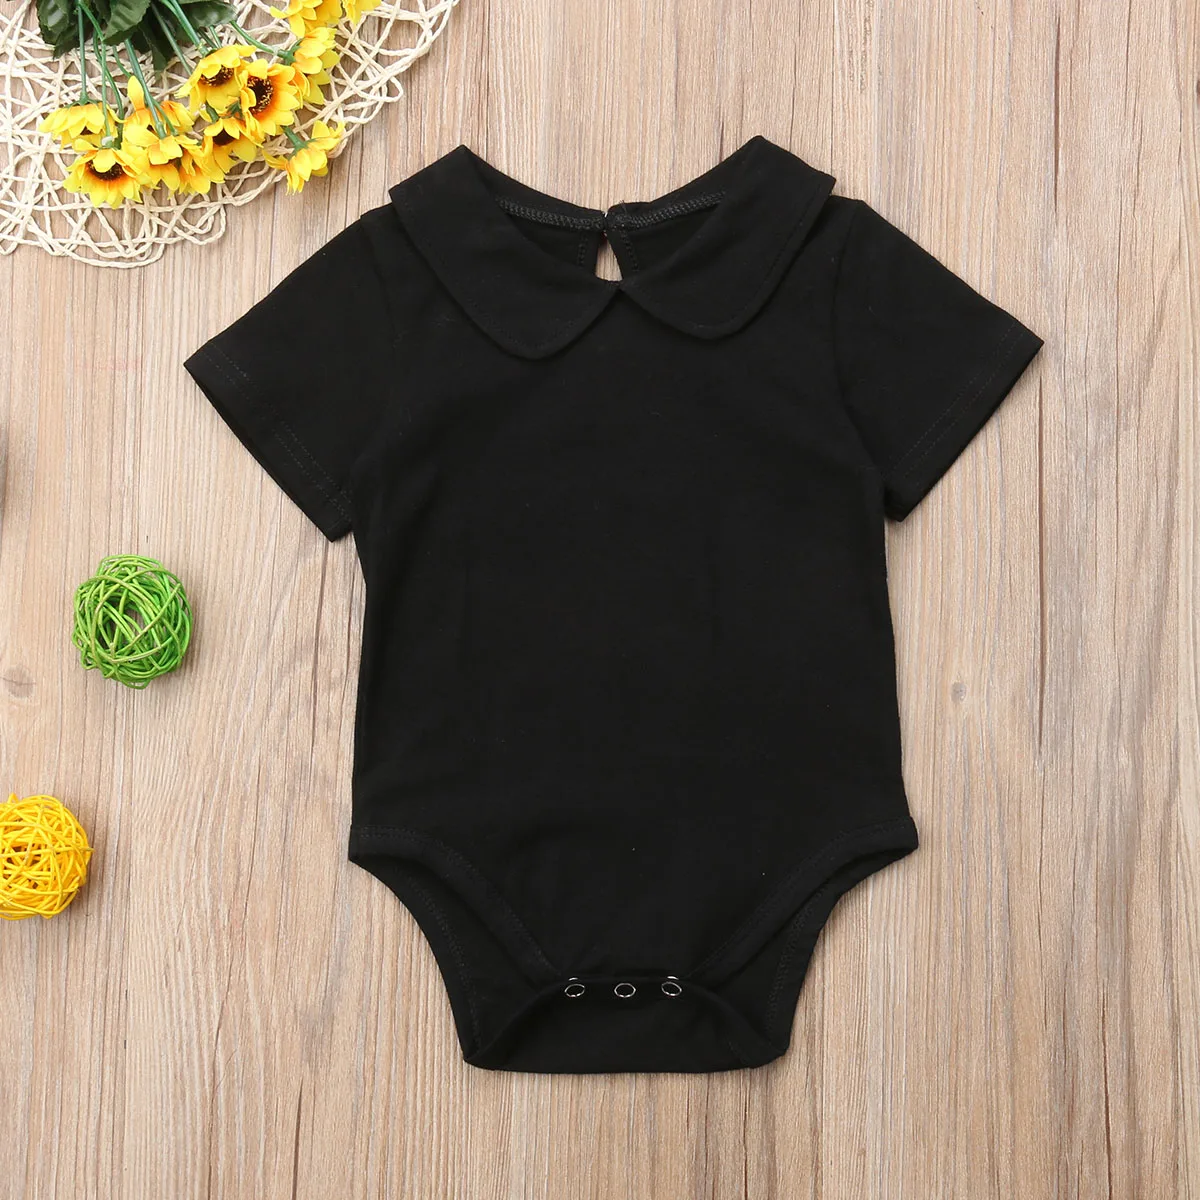 Brand New Newborn Infant Baby Girls Boys Casual Bodysuit Short Sleeve Peter Pan Collar Solid Cotton Jumpsuits Playsuit 0-1Y